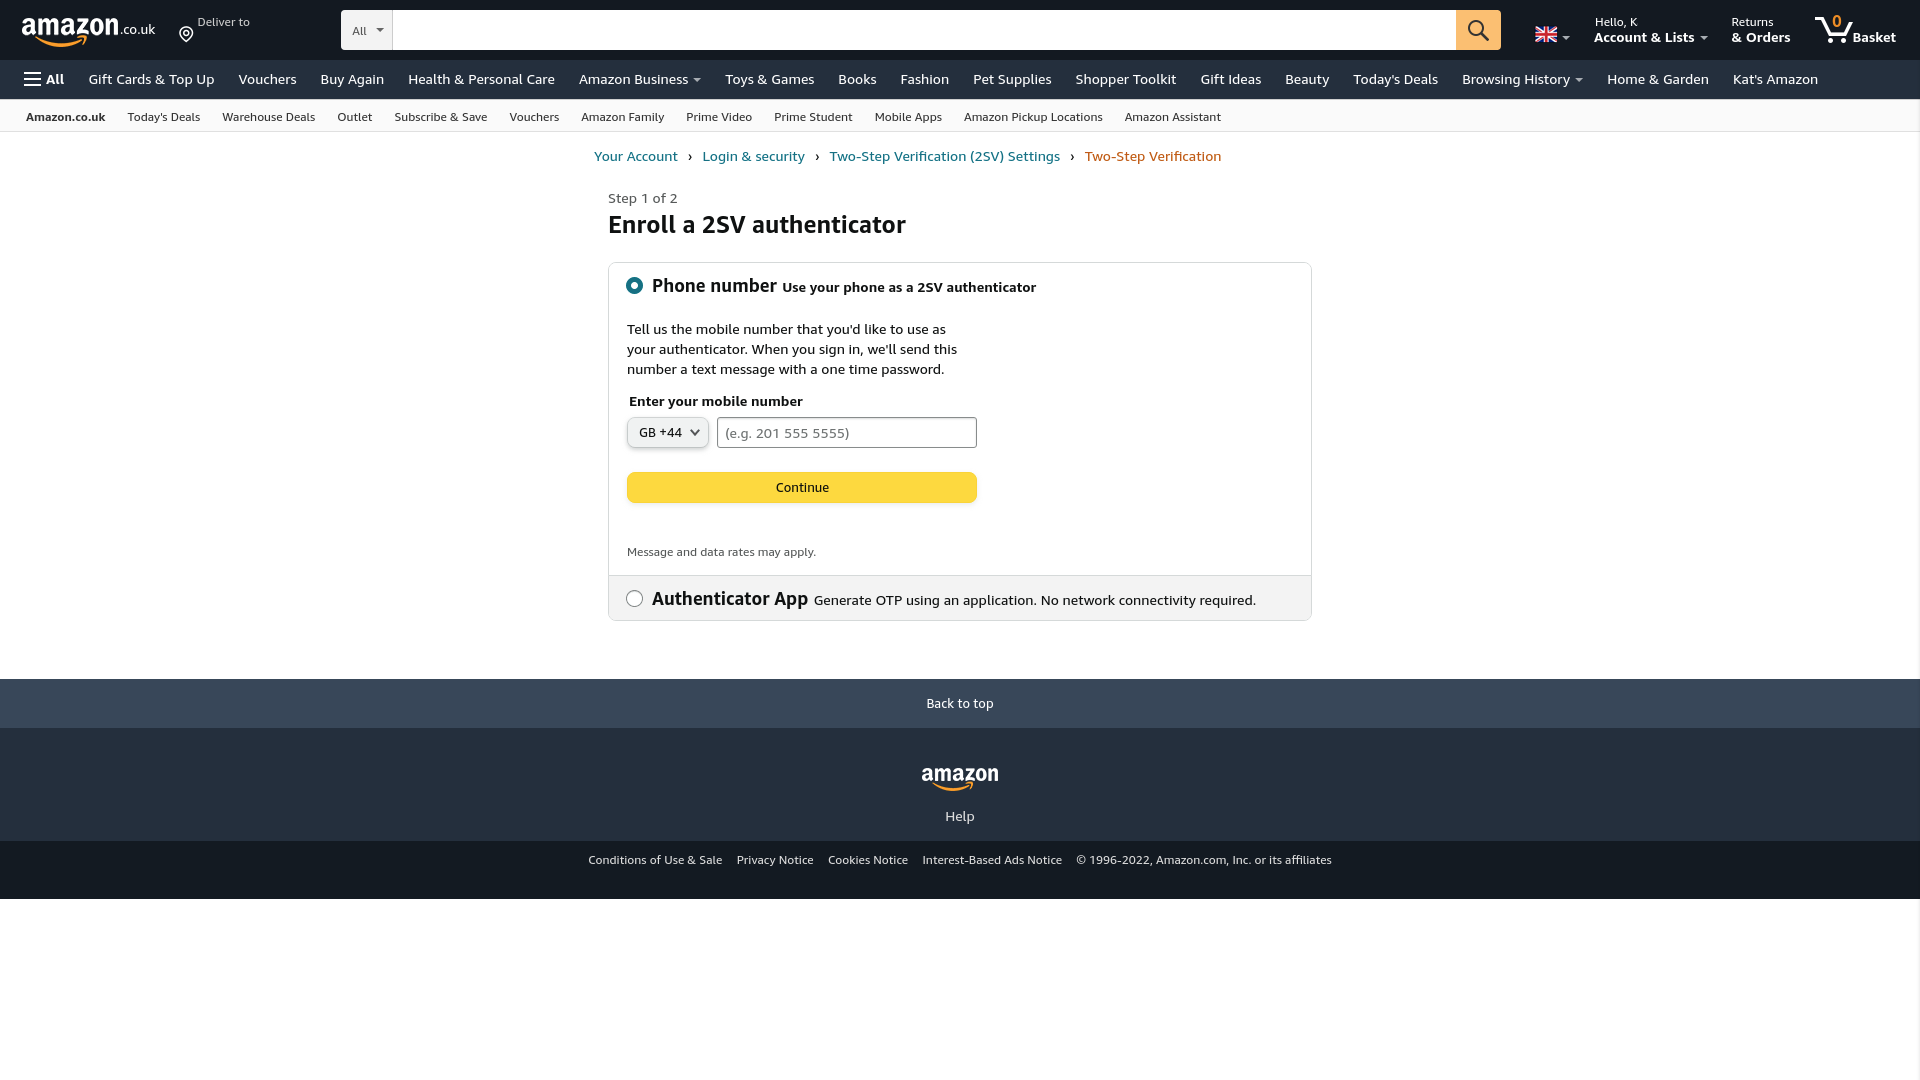 Amazon invites you to enroll an authenticator